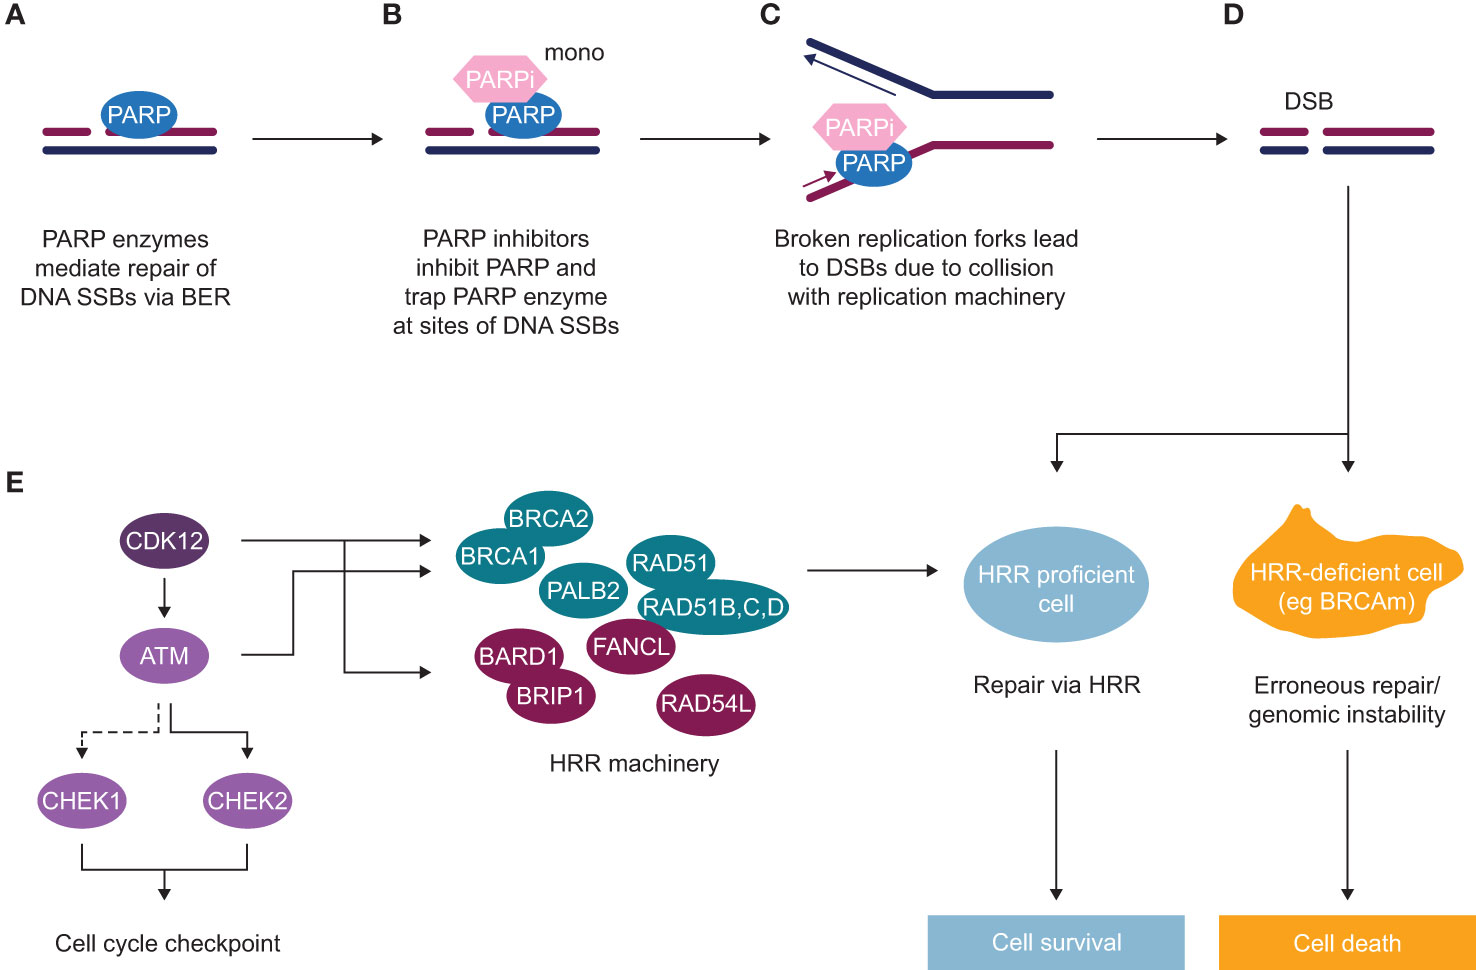 Alterations in homologous recombination repair genes in prostate